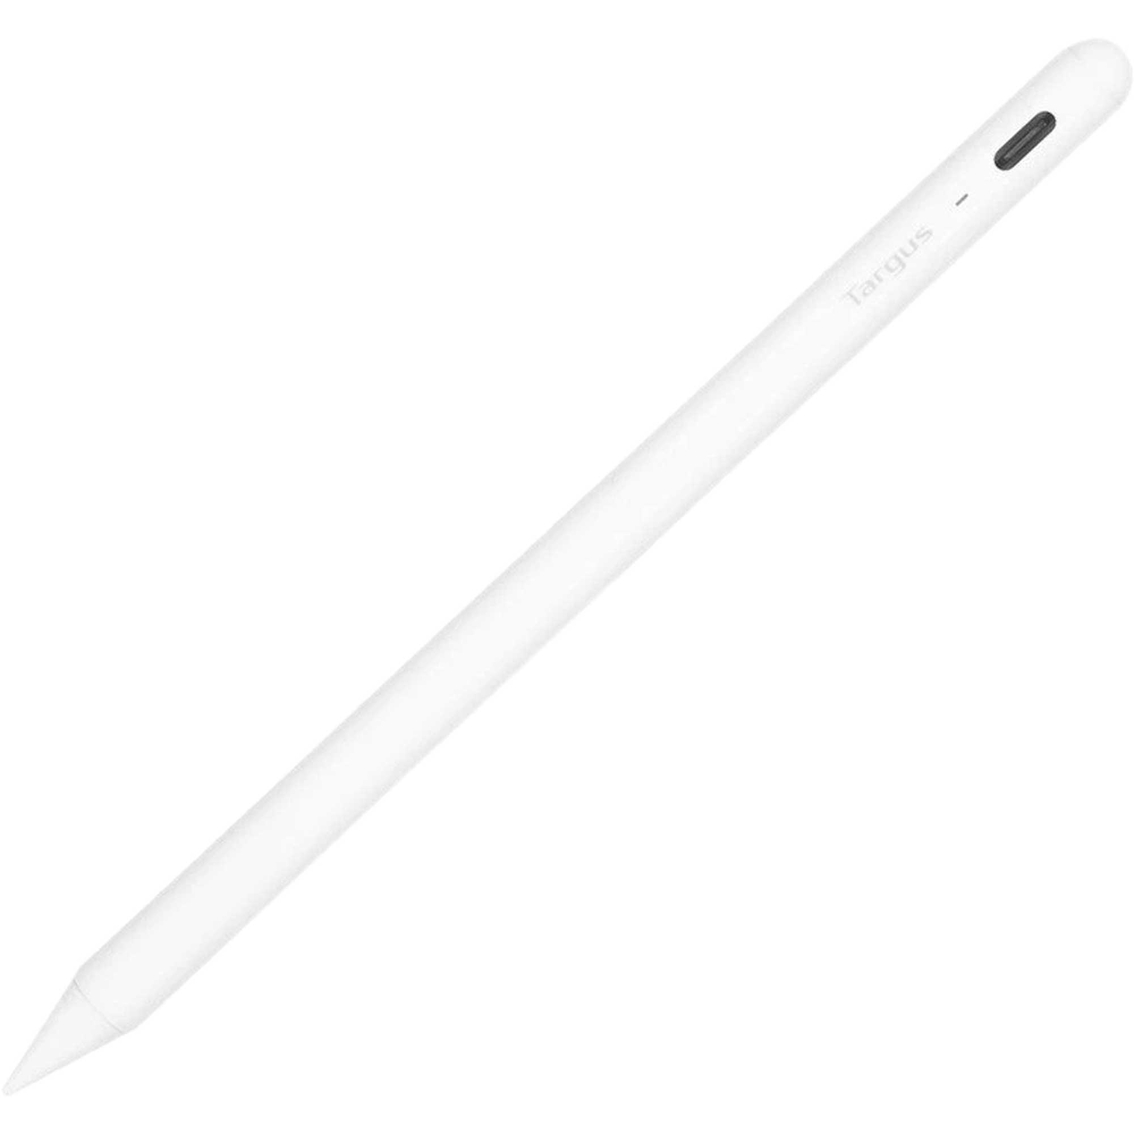 Antimicrobial Active Stylus for iPad 